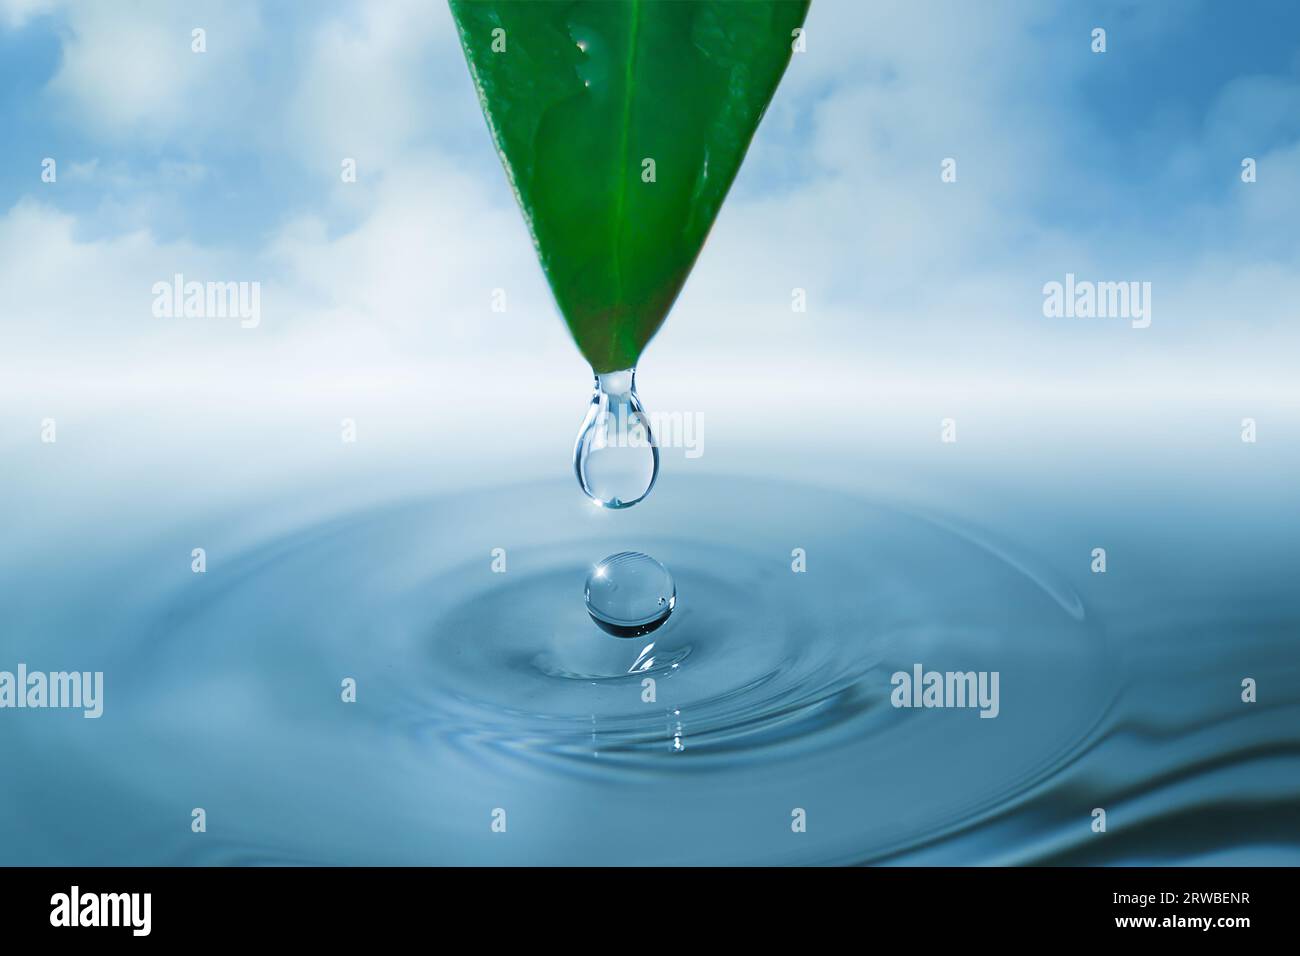 A water droplet falling from green leaf into a tranquil body of water, creating ripples and splashes Stock Photo